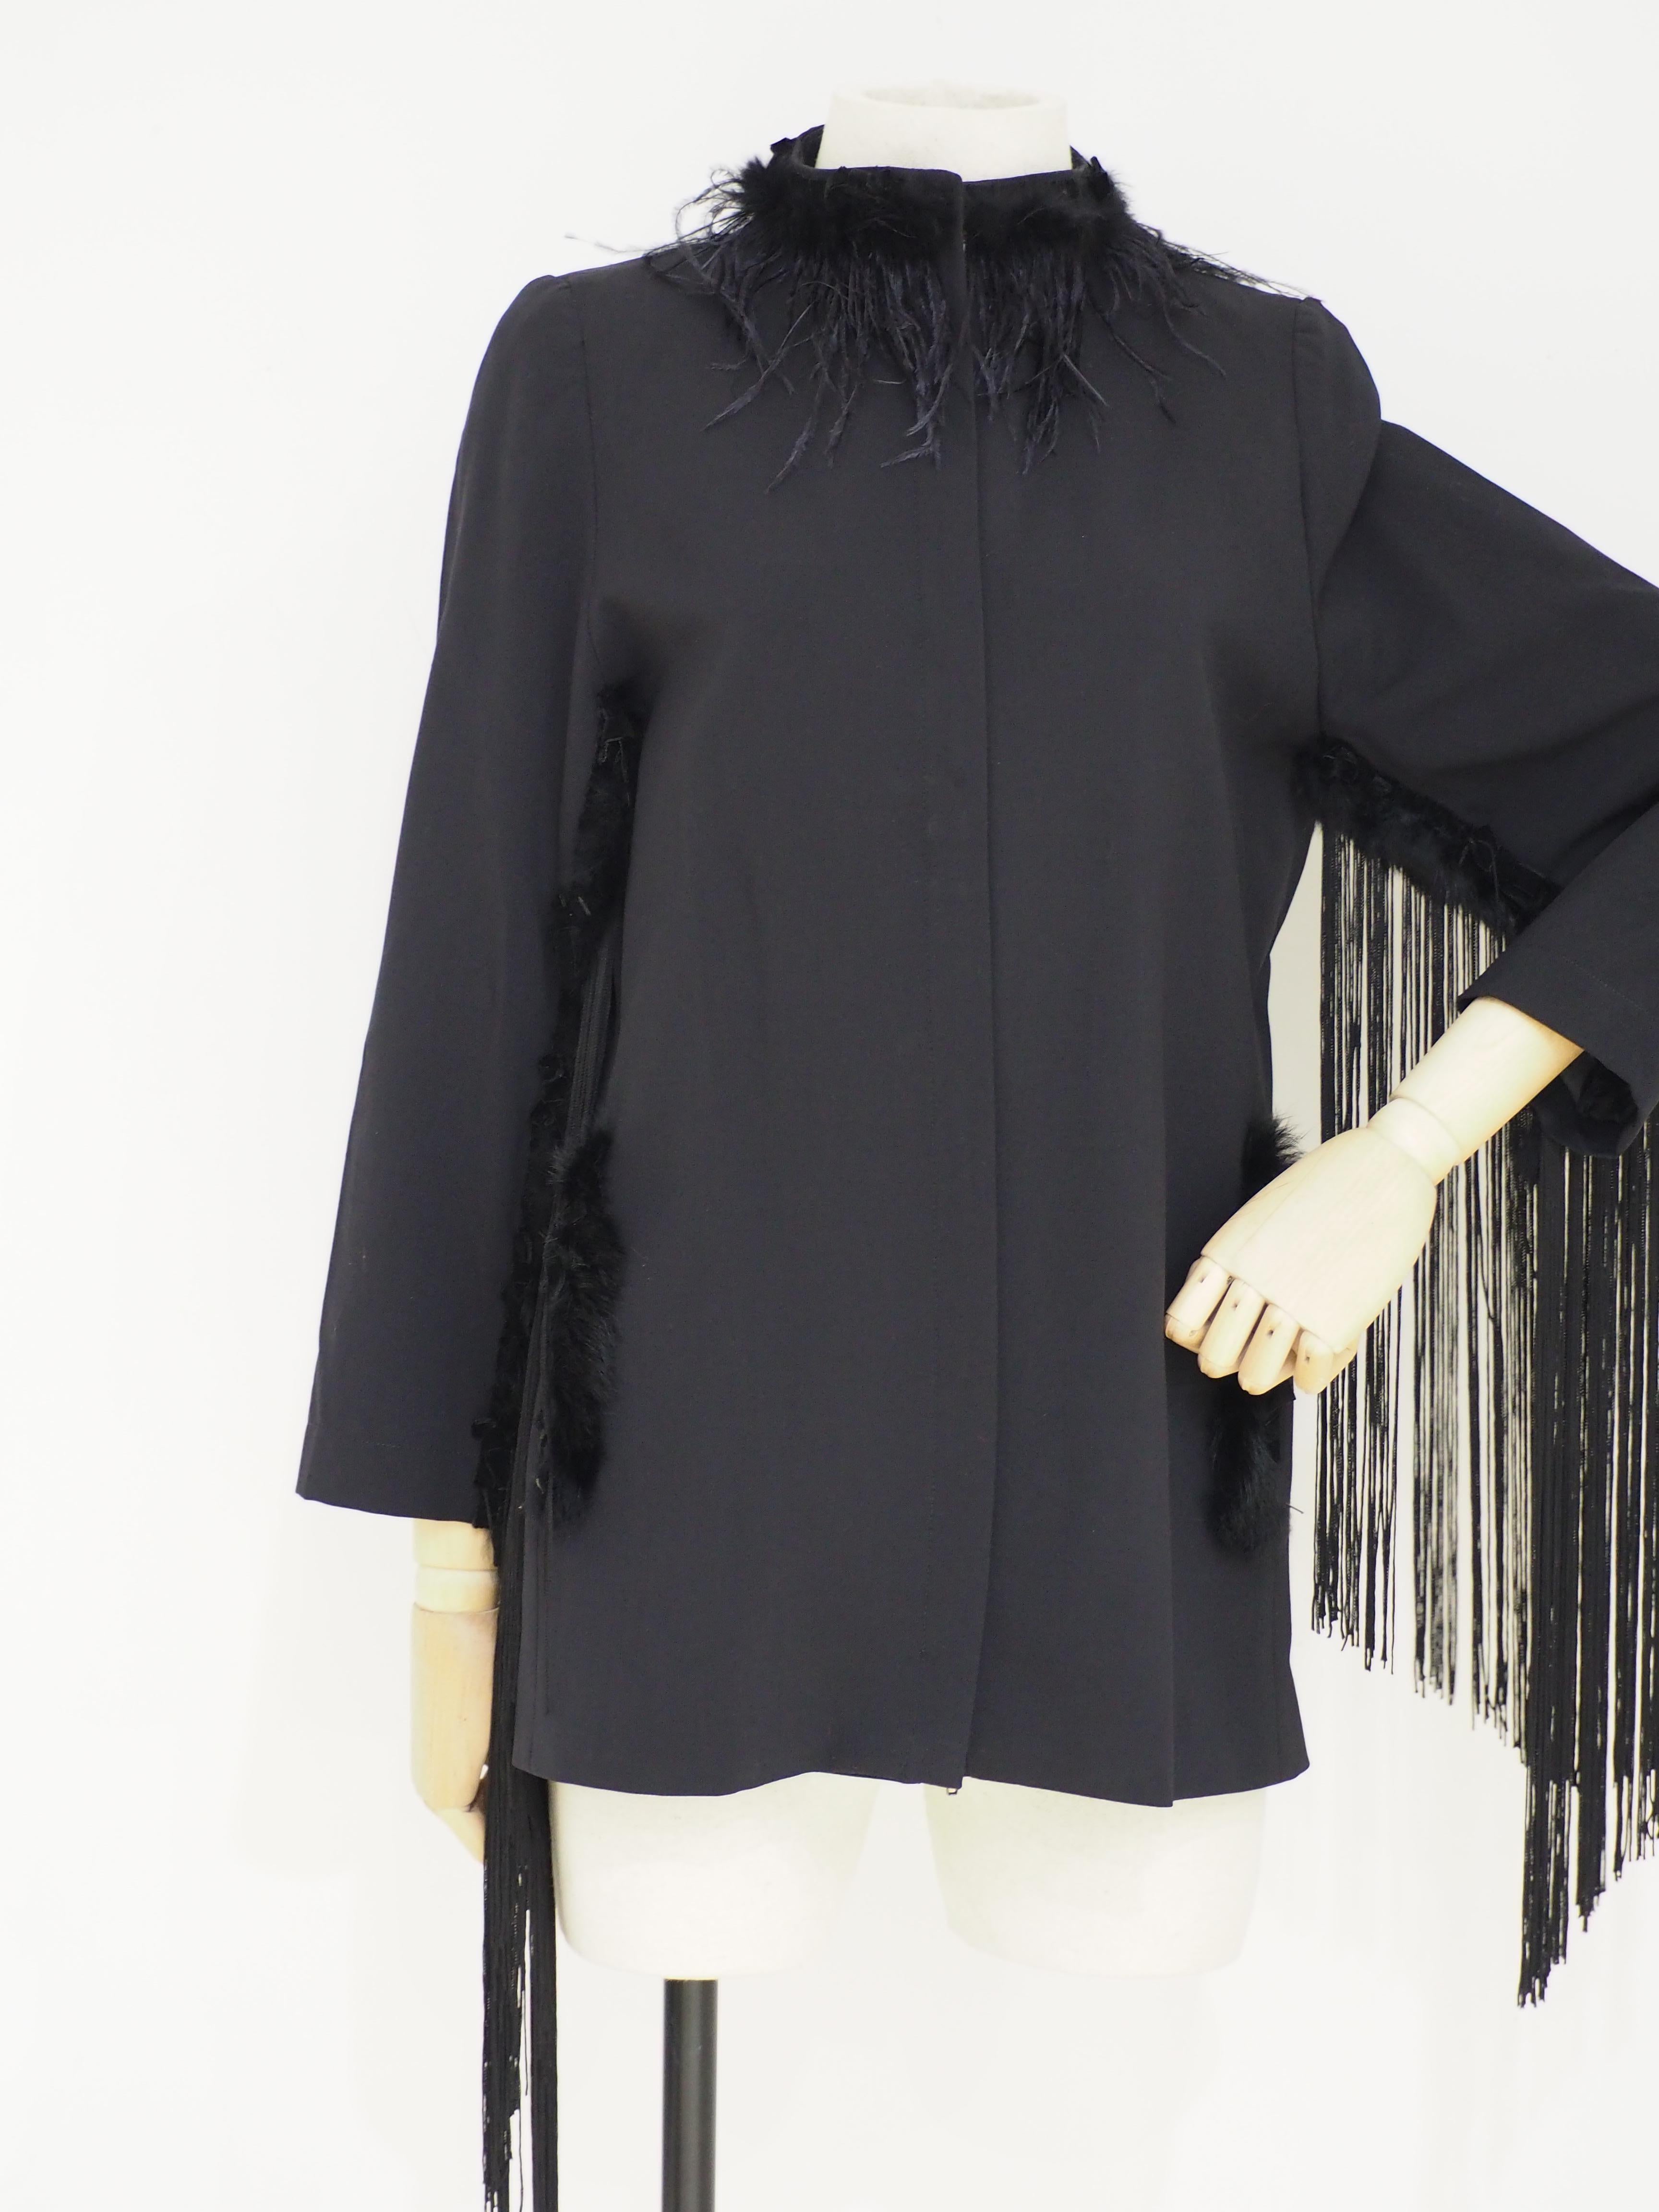 SOAB black feathers and fringes jacketa vintage Ferre black jacket embellished with contemporary feathers and fringes 
totally handmade
size 44
composition: Viscose